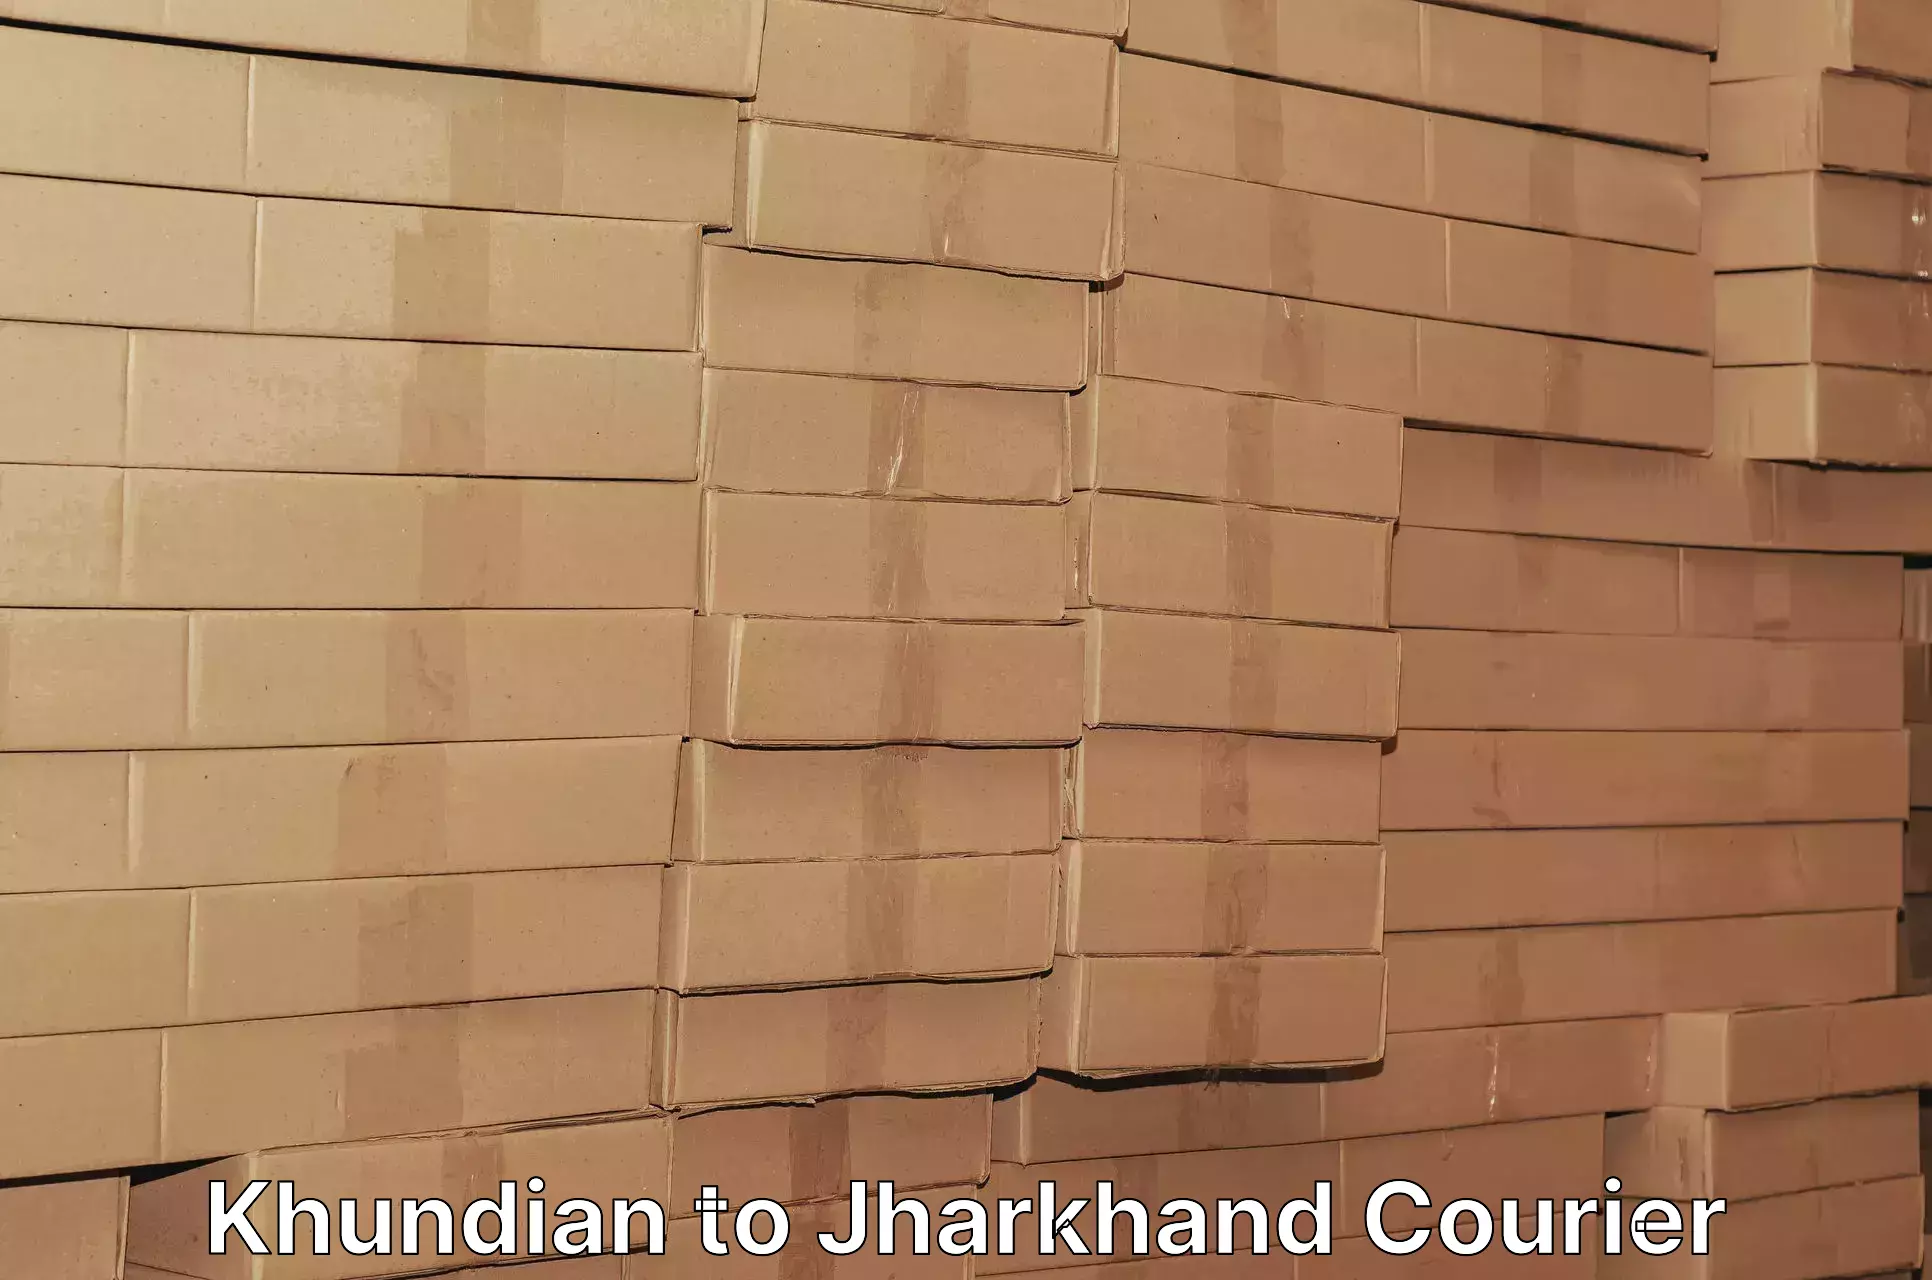 Package delivery network Khundian to Jharkhand